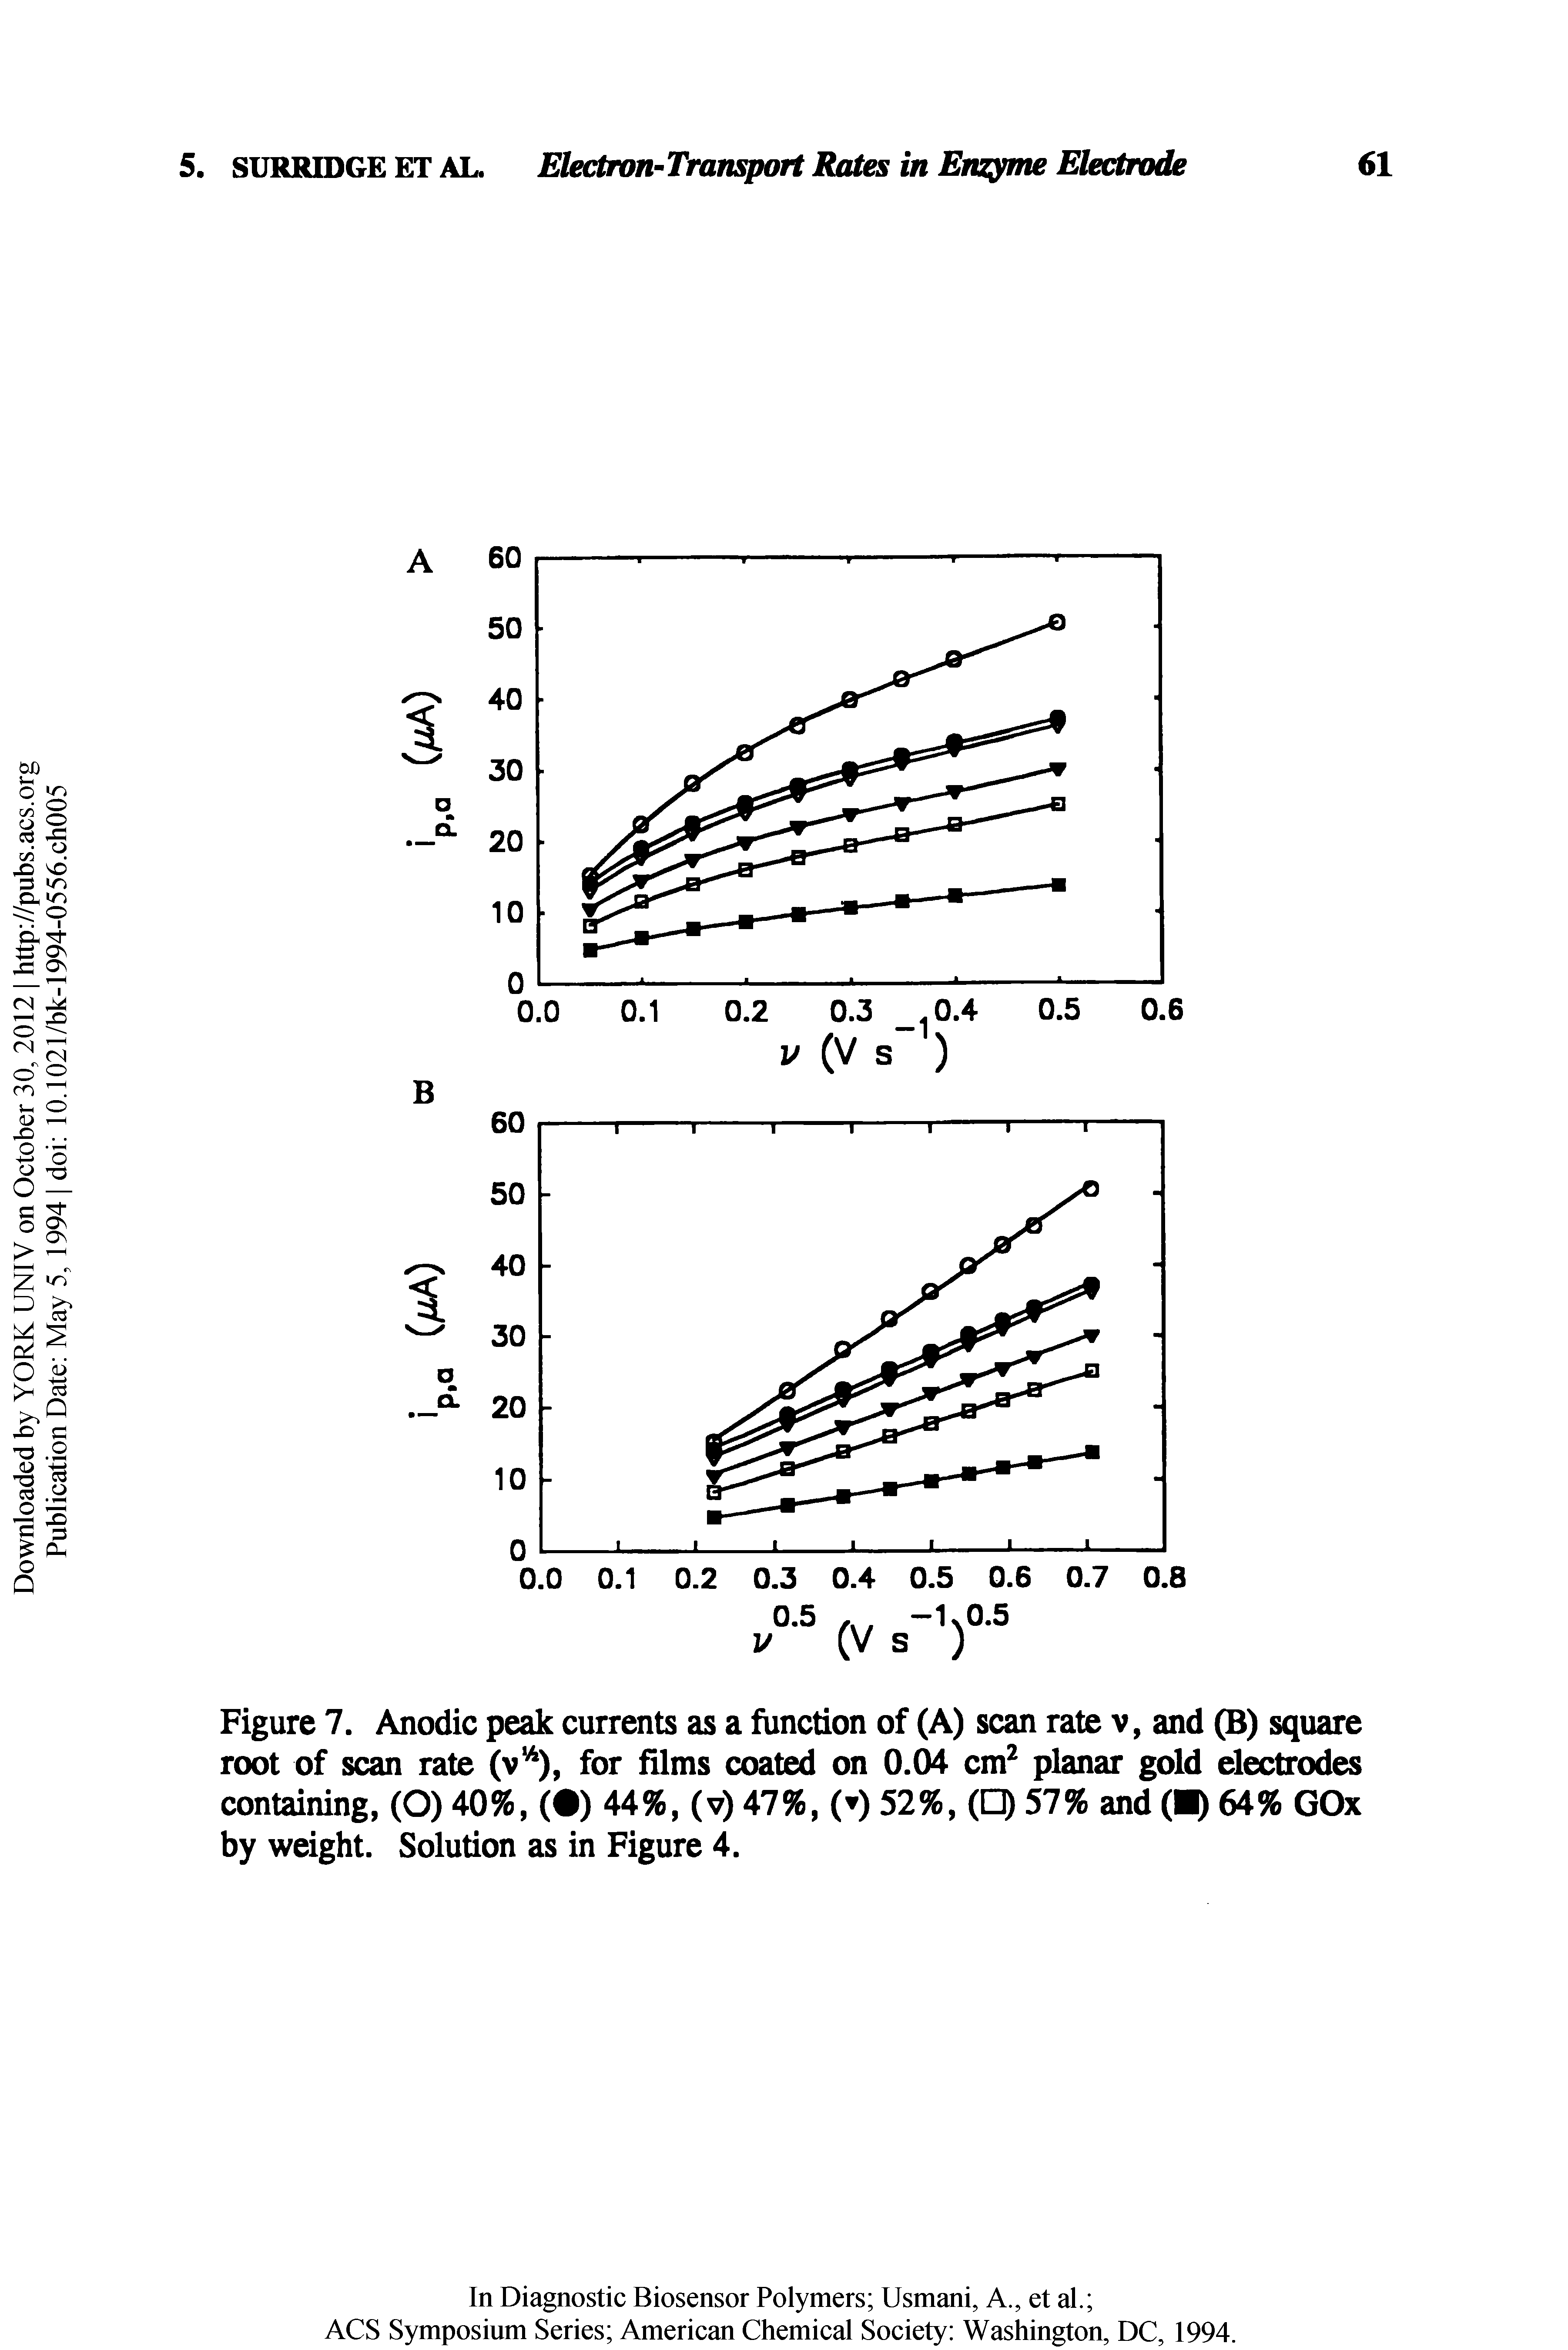 Figure 7. Anodic peak currents as a function of (A) scan rate v, and (B) square root of scan rate (v ), for Aims coated on 0.04 cm planar gold electrodes containing, (O) 40%, ( ) 44%, (v) 47%, ( ) 52%, ( ) 57% and ( ) 64% GOx by weight. Solution as in Figure 4.